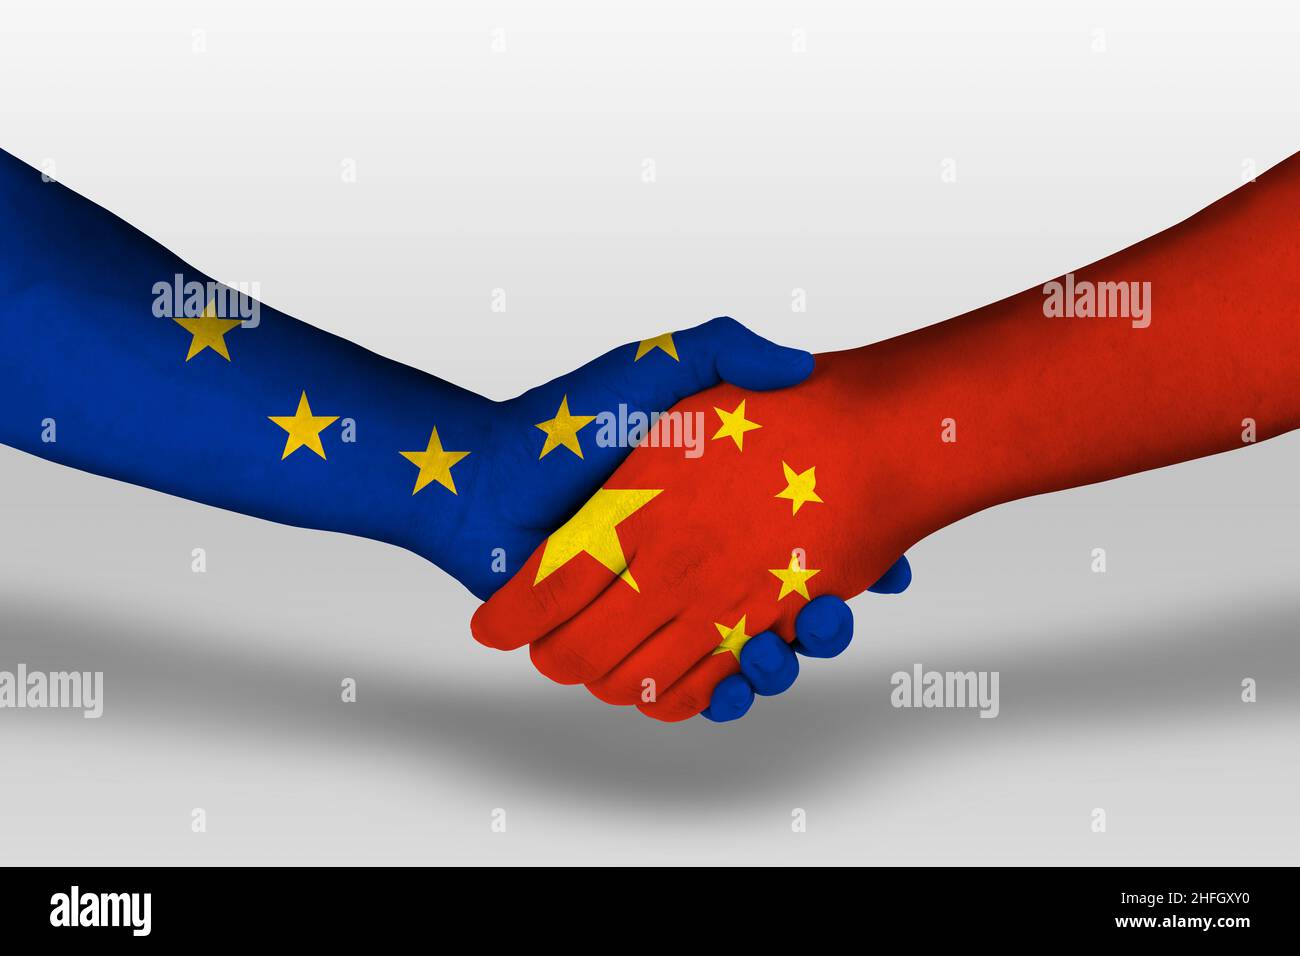 Handshake between canada and european union flags painted on hands, illustration with clipping path. Stock Photo